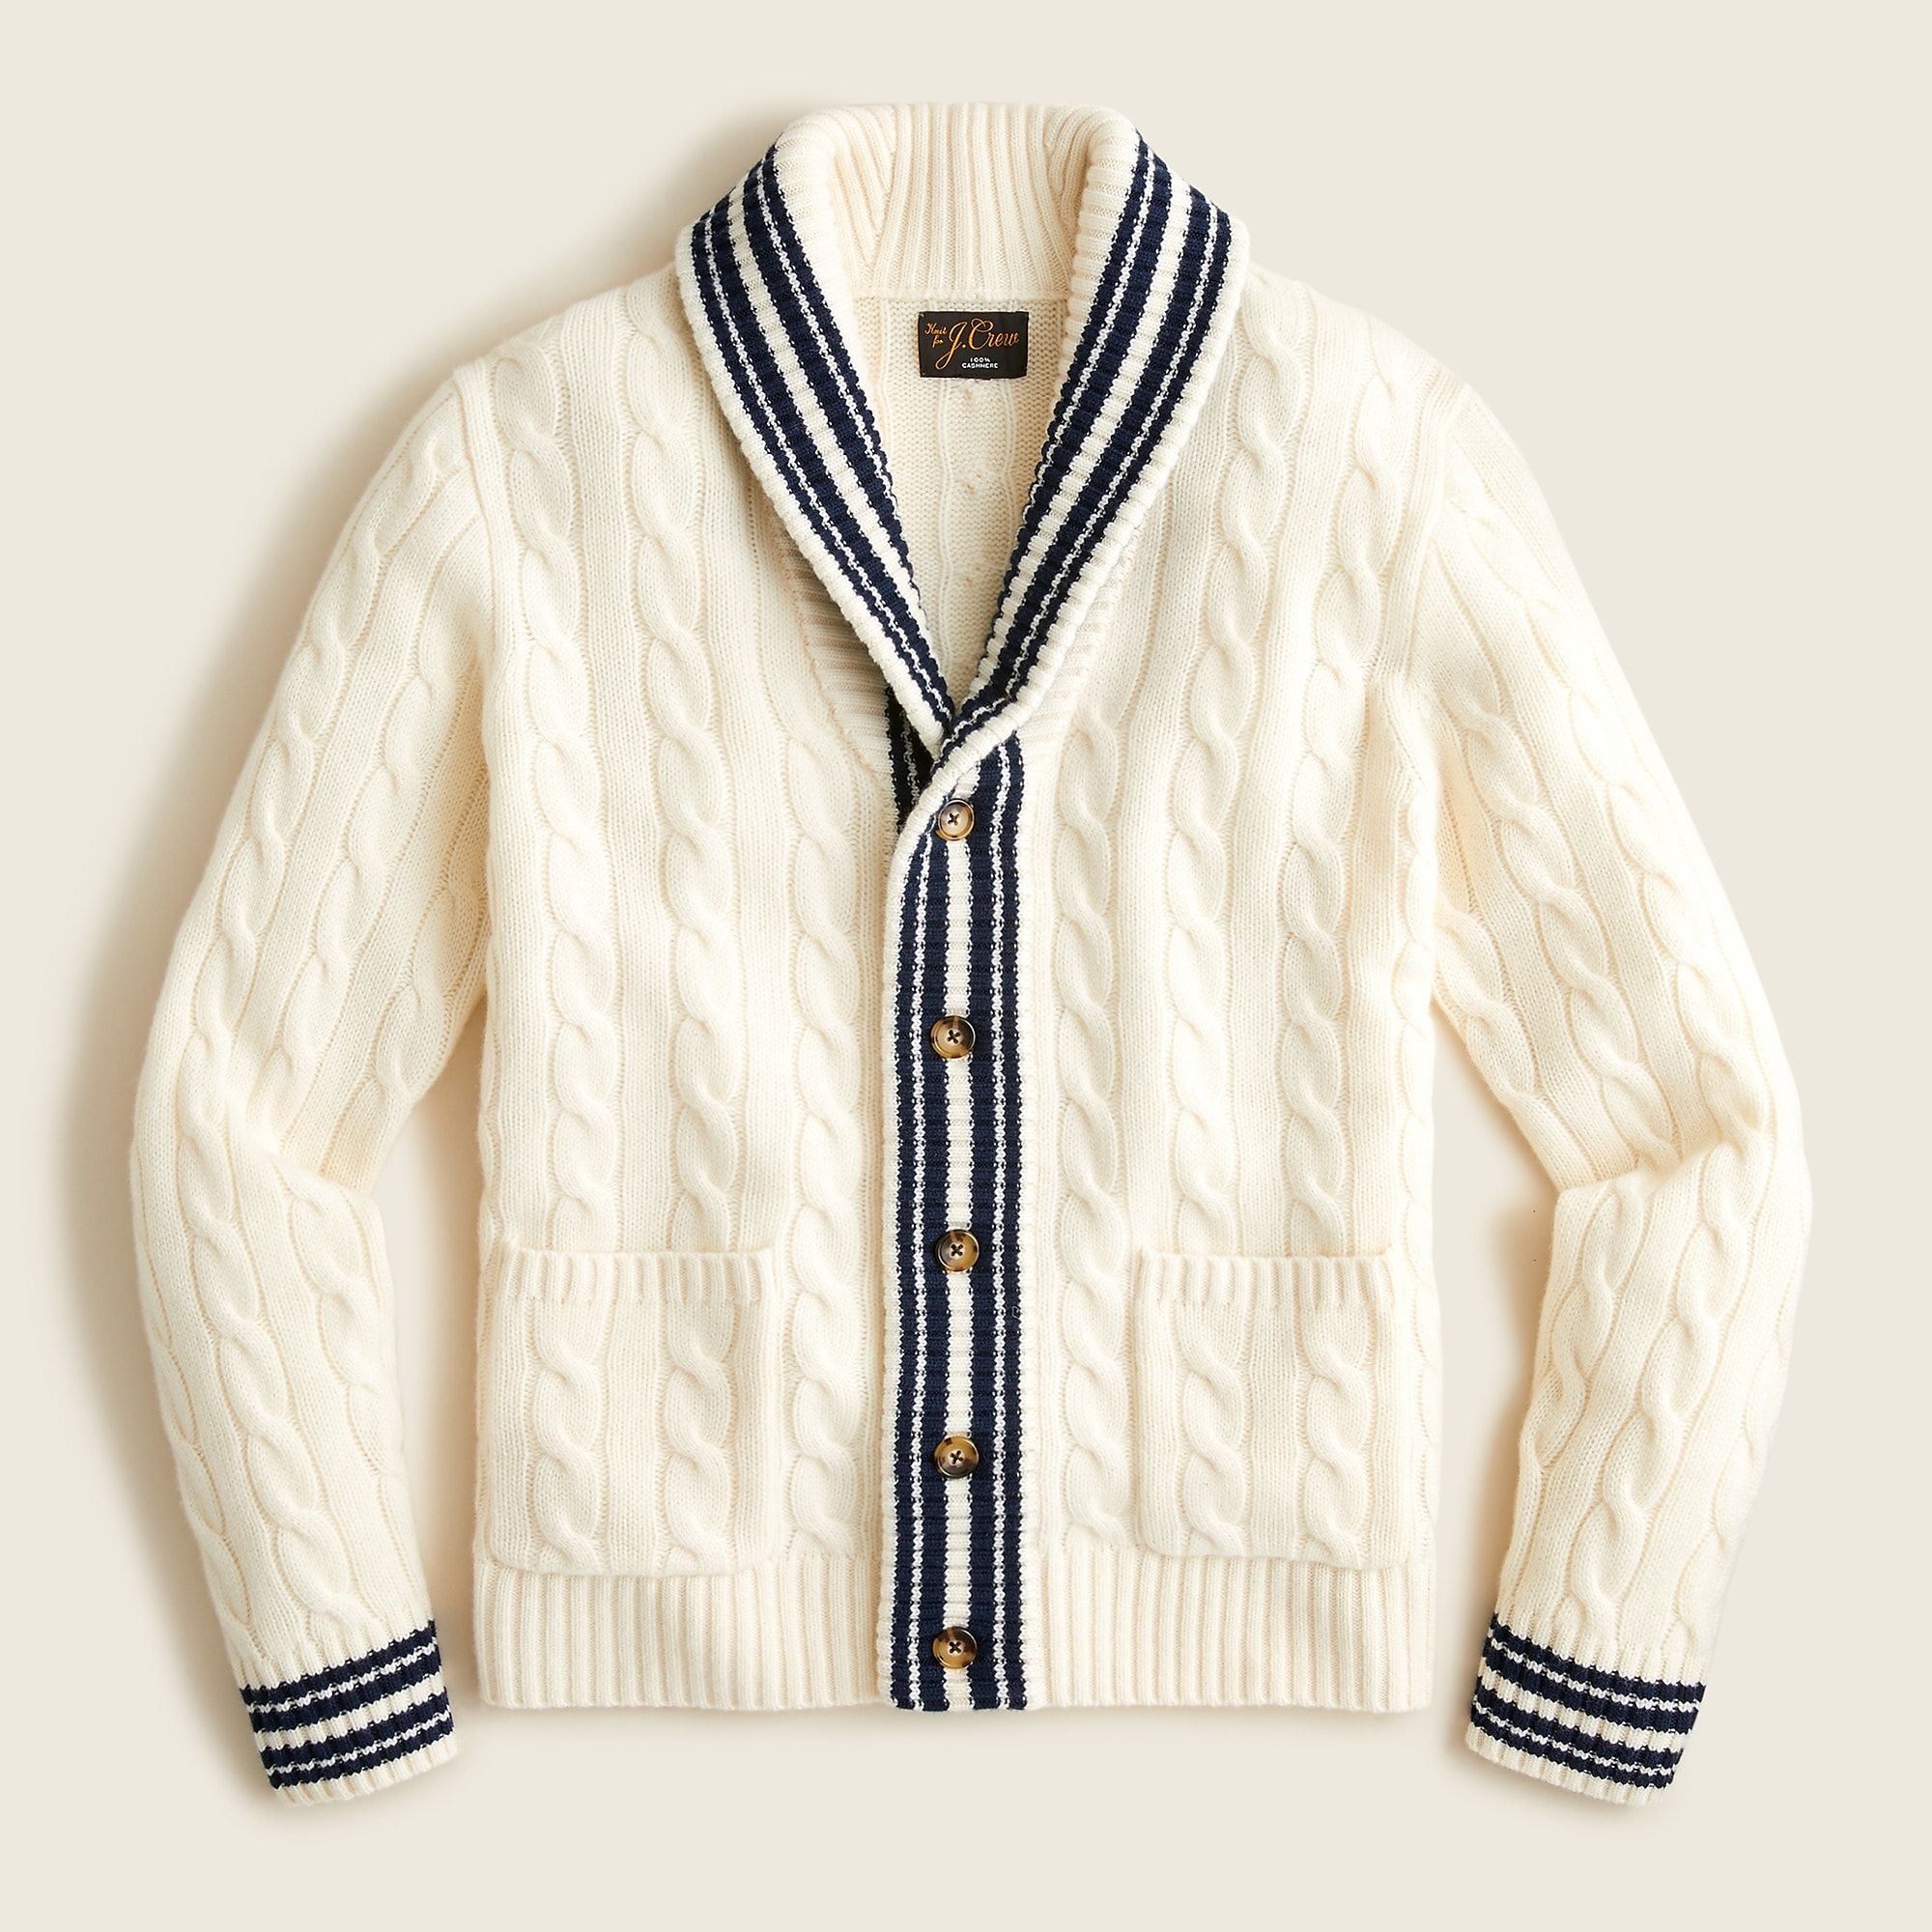 Some important aspects of mens cardigan
sweaters